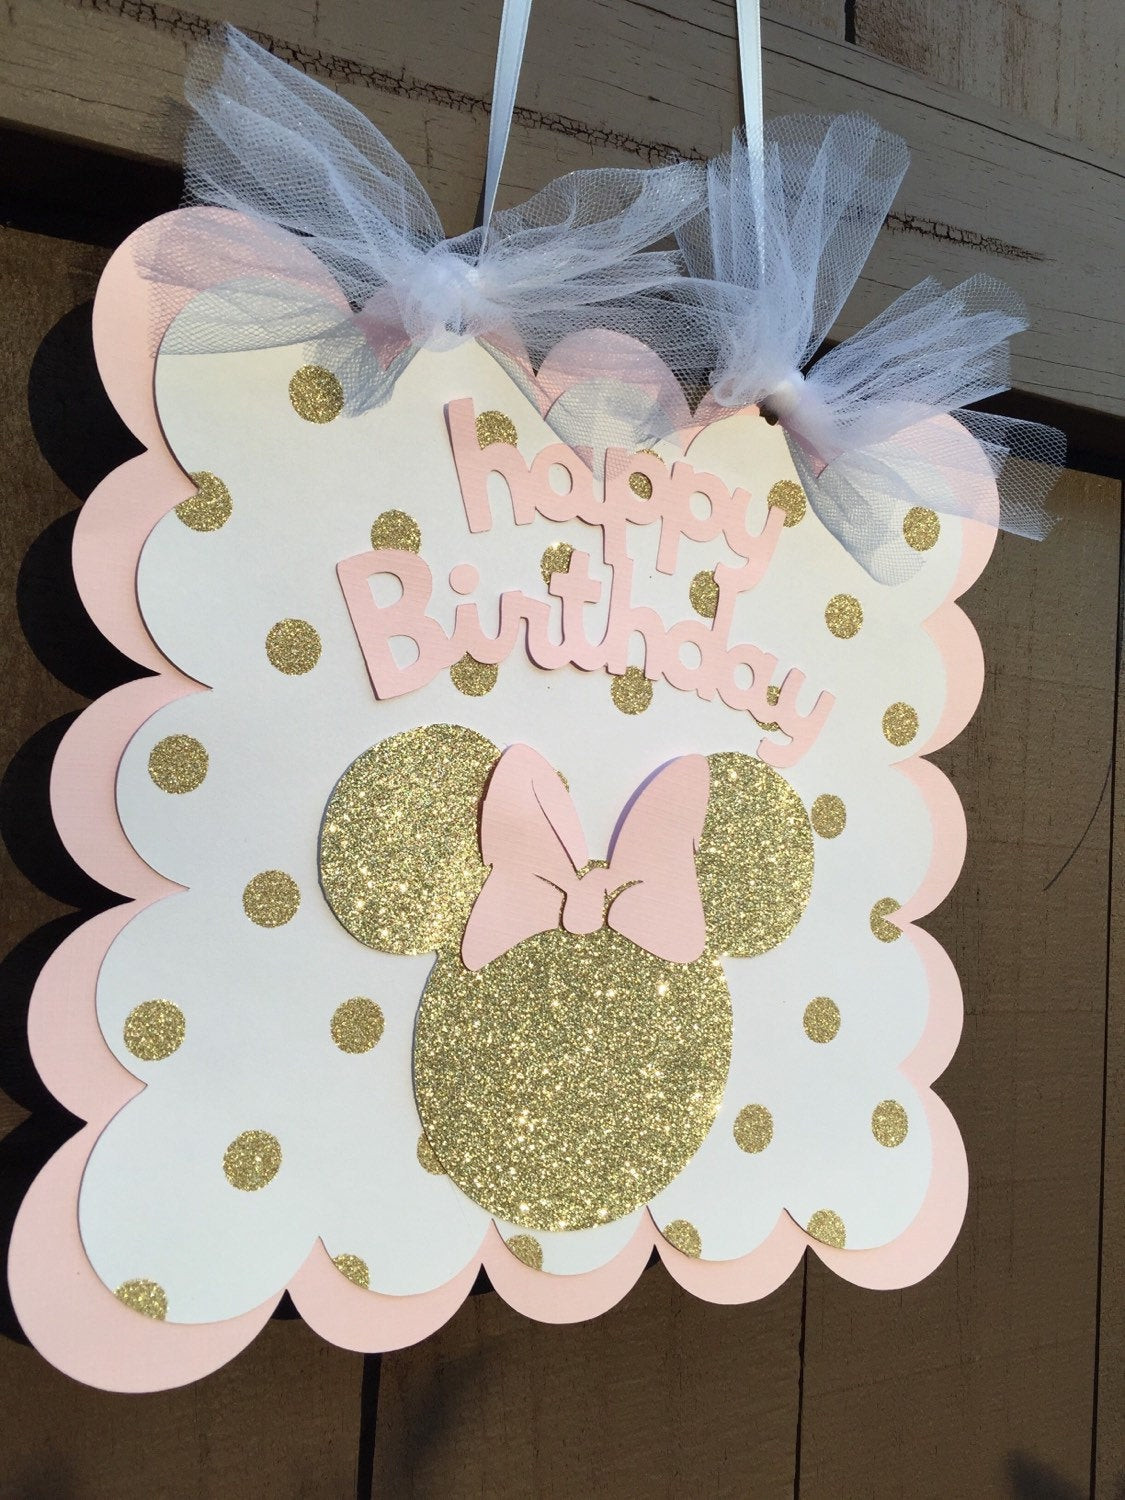 Minnie Mouse Birthday Decorations Pink
 Pink and Gold Minnie Mouse Birthday Sign birthday party